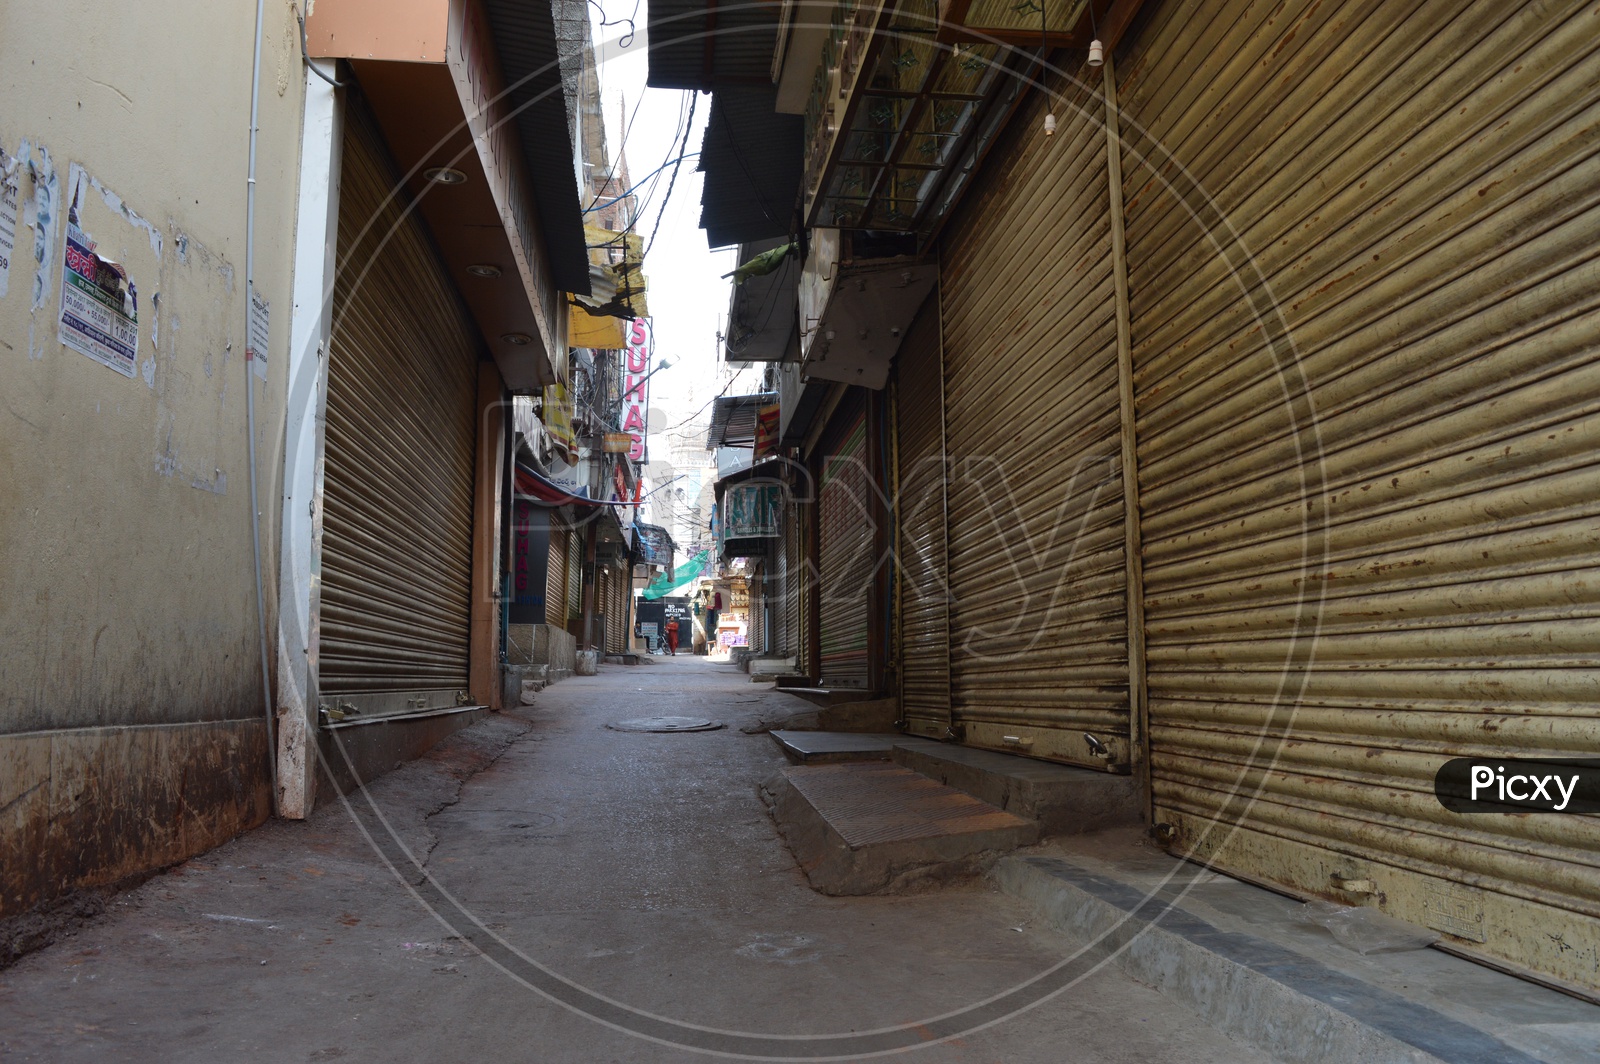 Streets Around Charminar With Shops Shut Closed